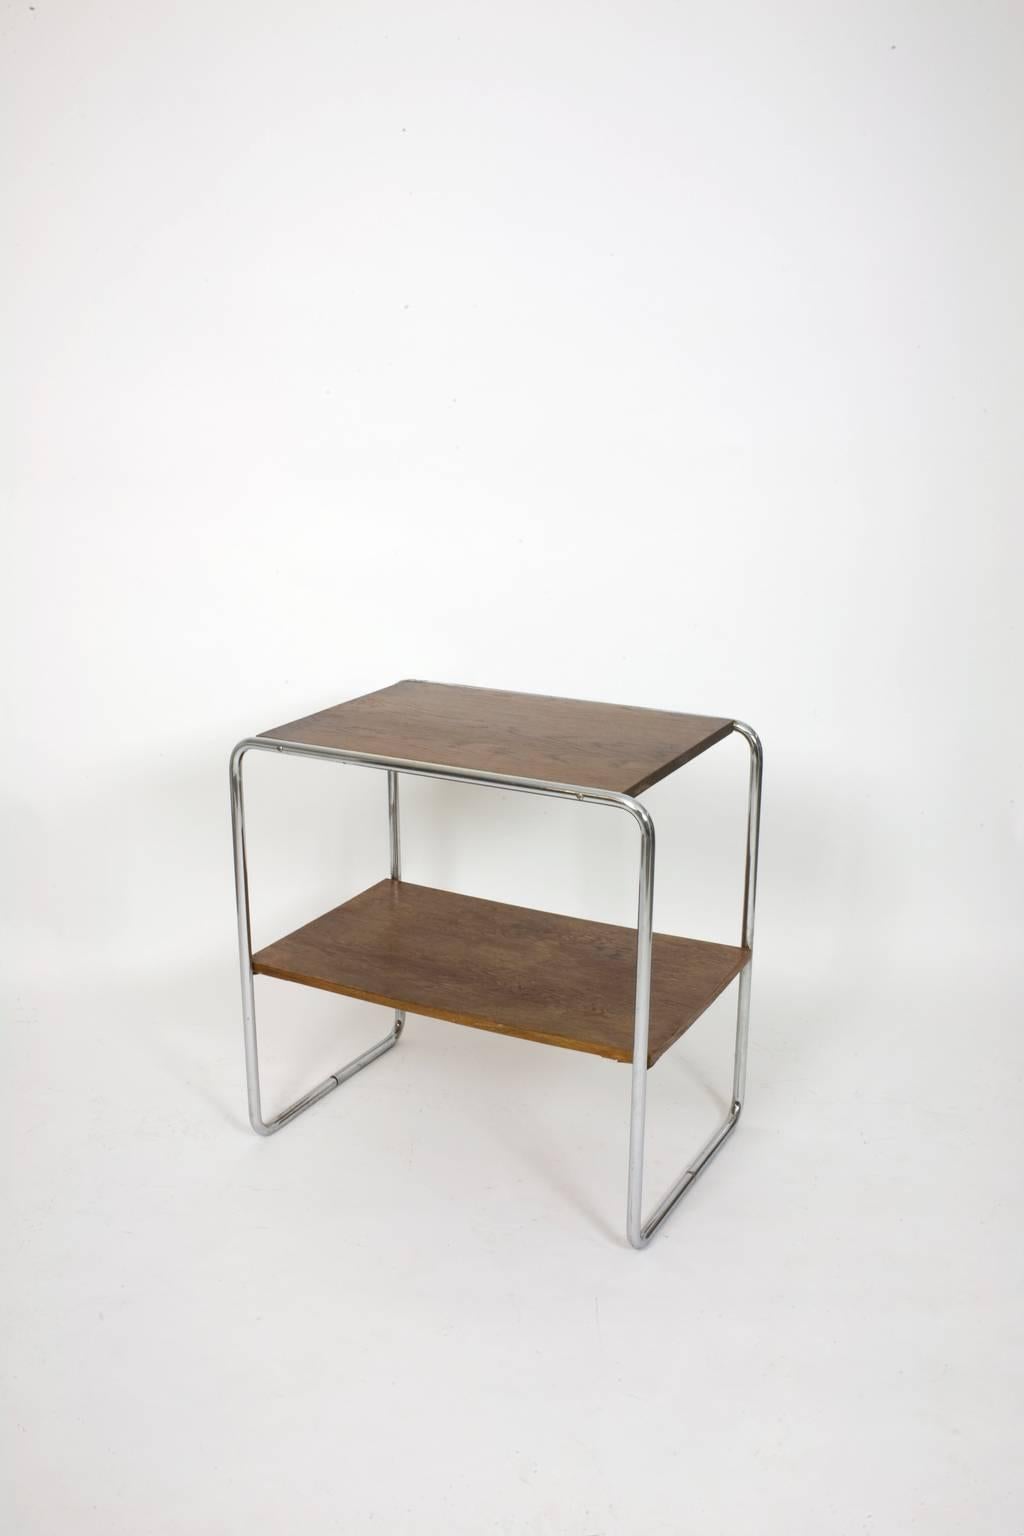 A beautiful piece of the Bauhaus style with two ledges designed by Marcel Breuer in the 1930s.

This bar console table is available in various colors.